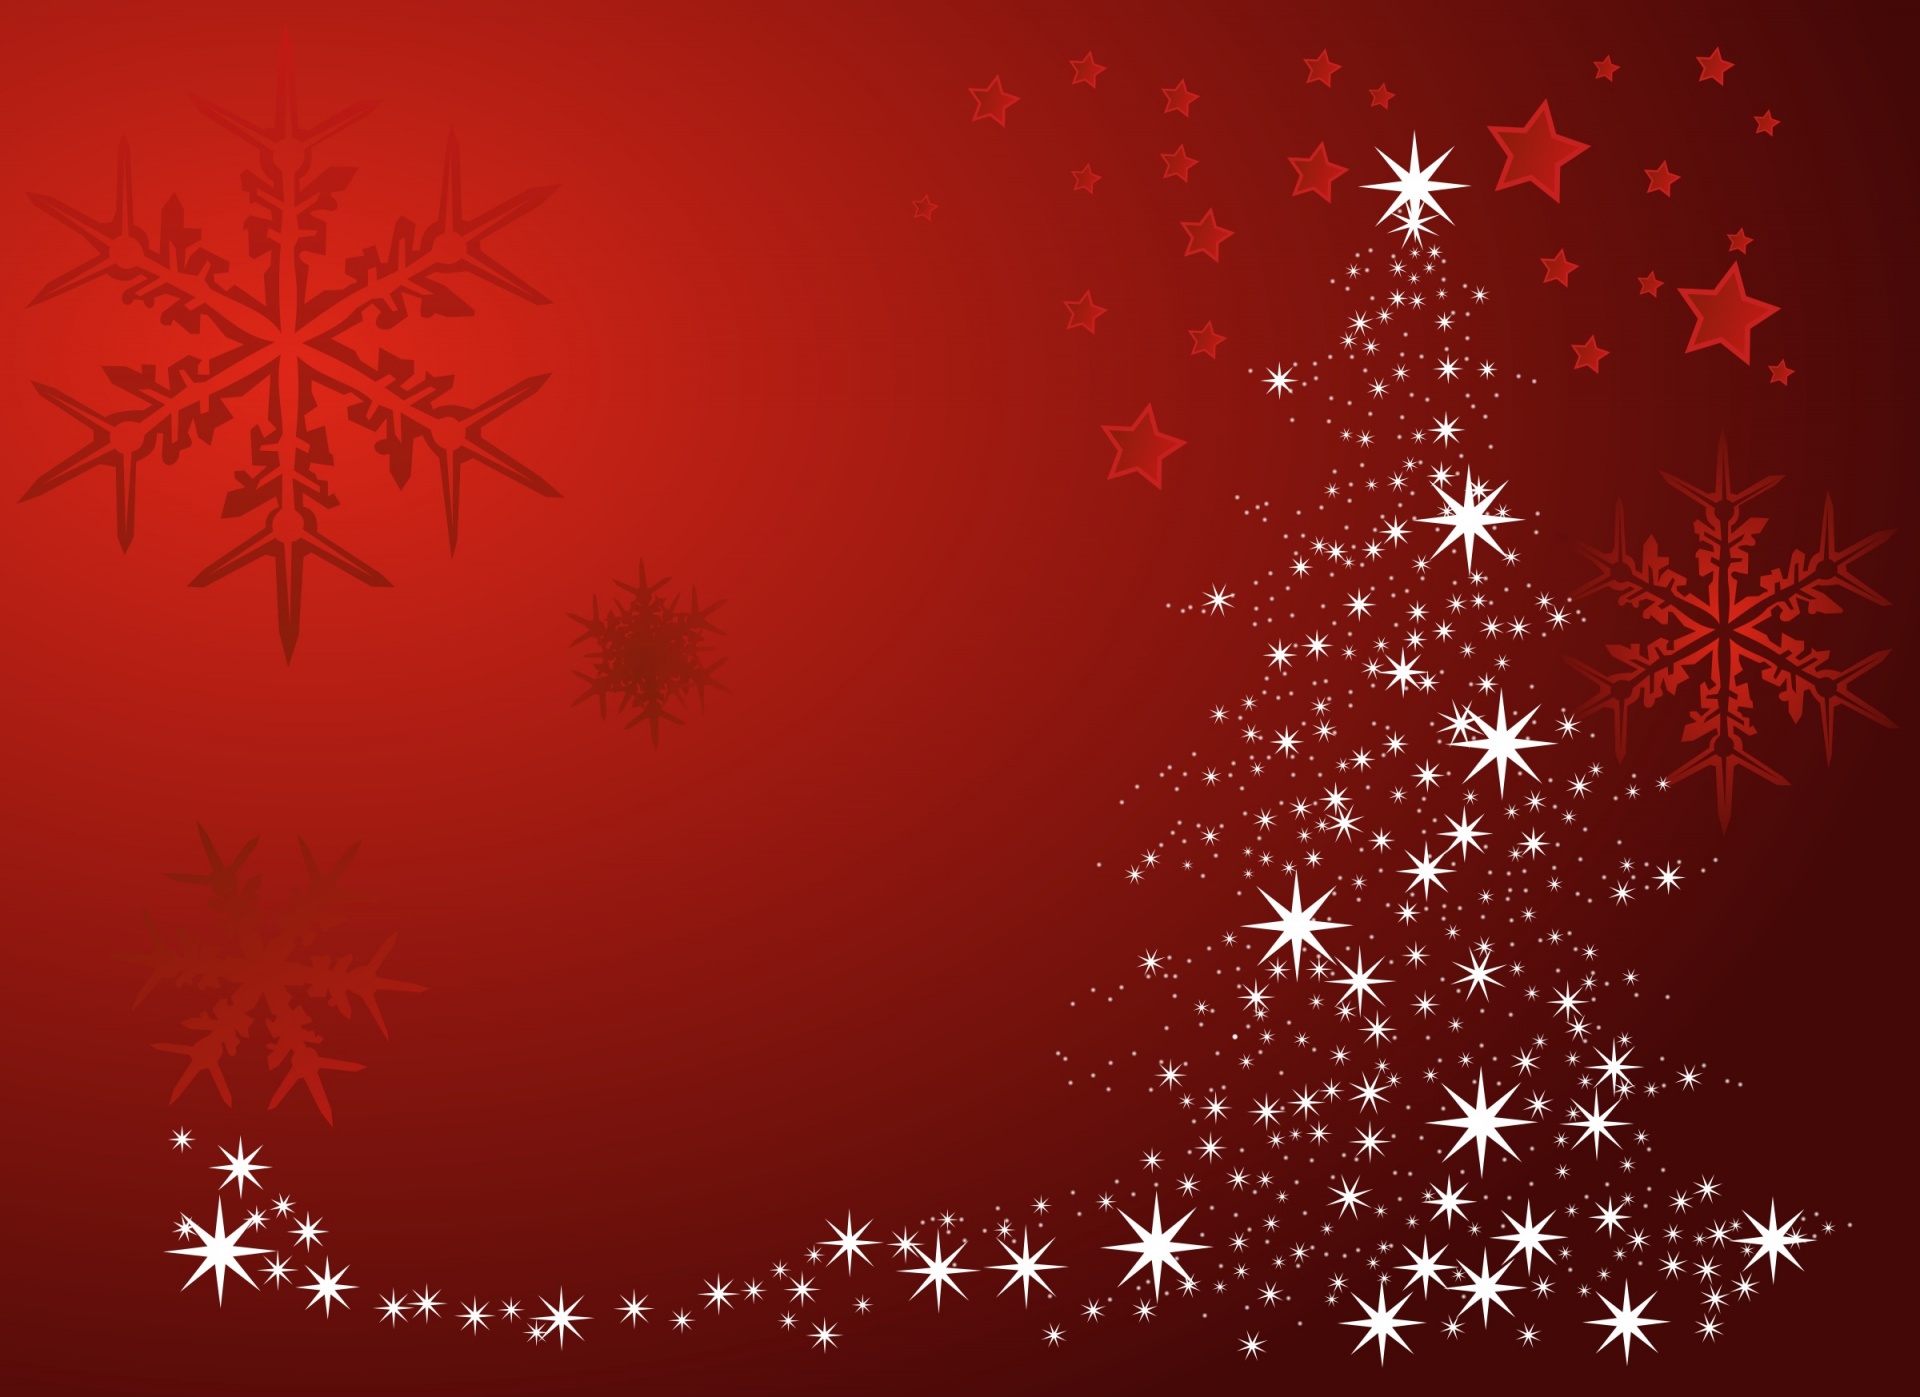 free-download-holidaychristmasbackgroundwallpaperpublic-domain-free-photo-1920x1397-for-your